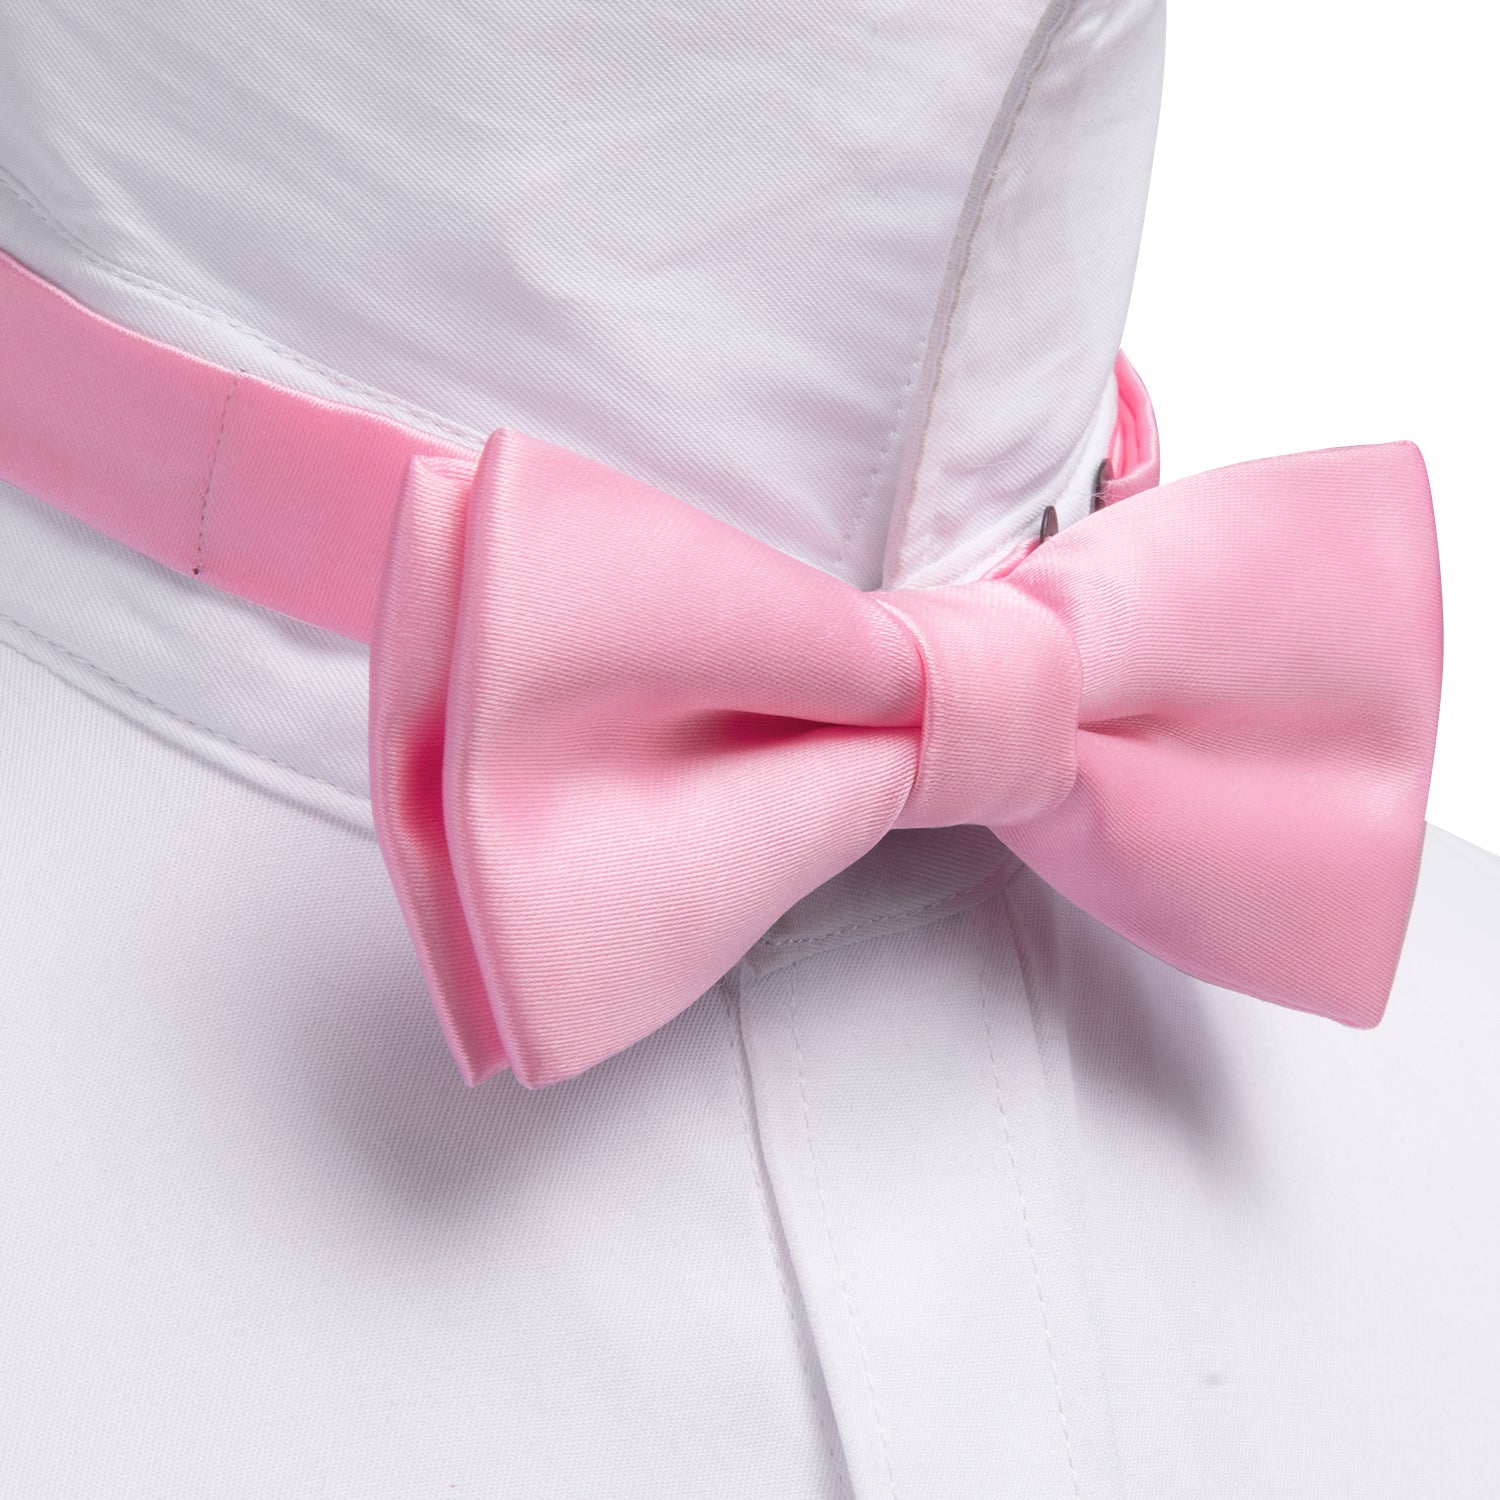 Barry.wang Kids Tie Pink Solid Children Bow Tie Pocket Square Set